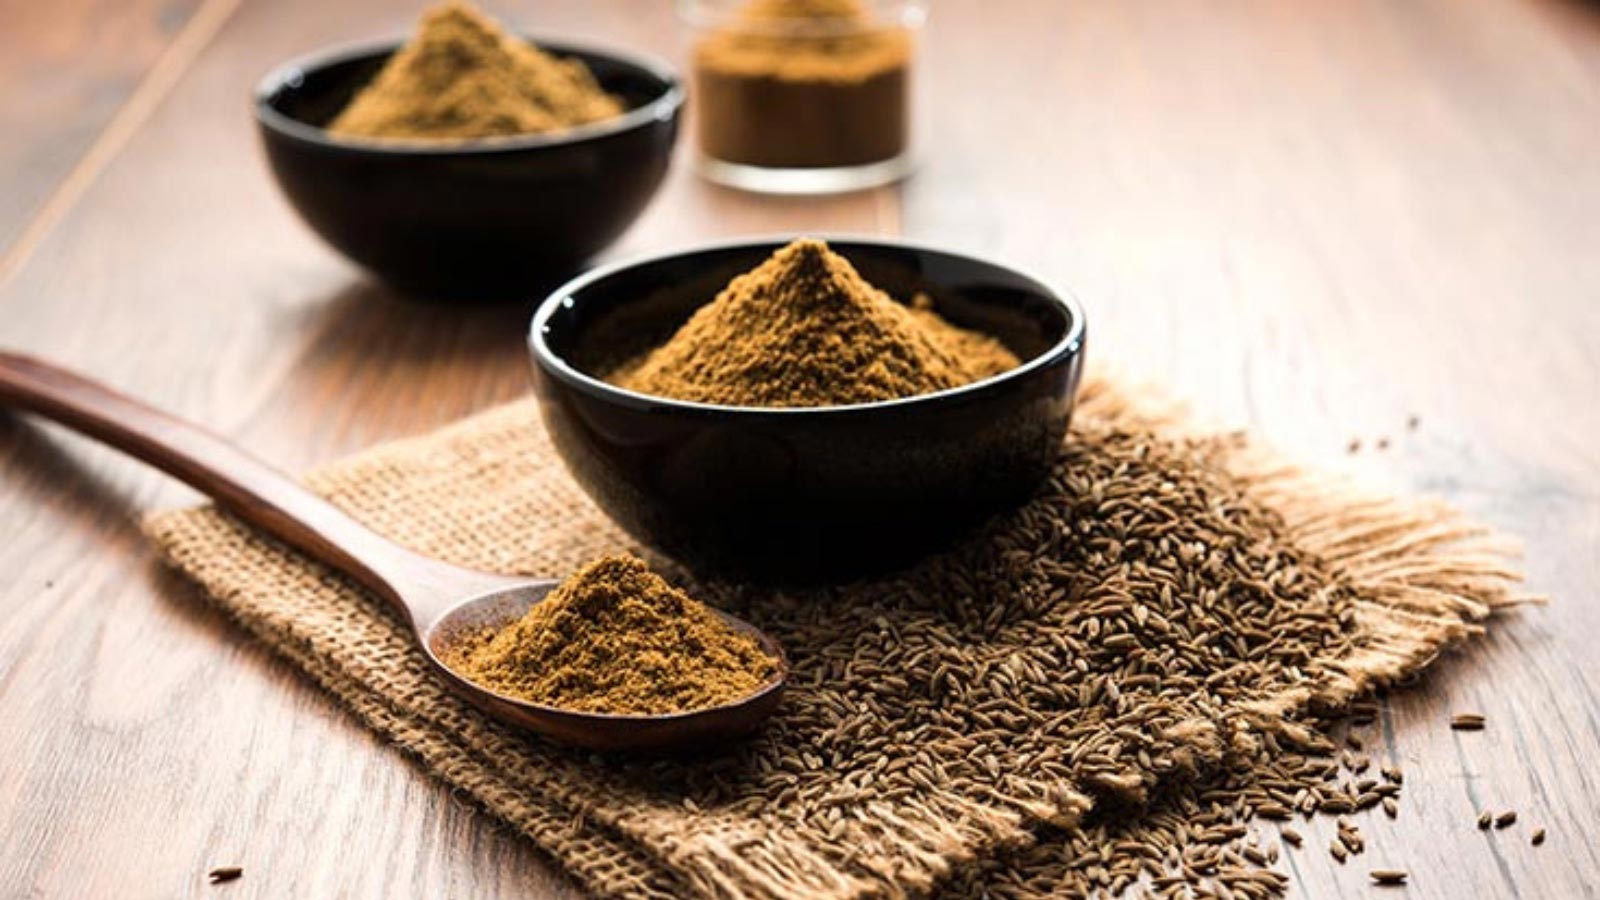 Ground cumin in small bowls and on a wood spoon.